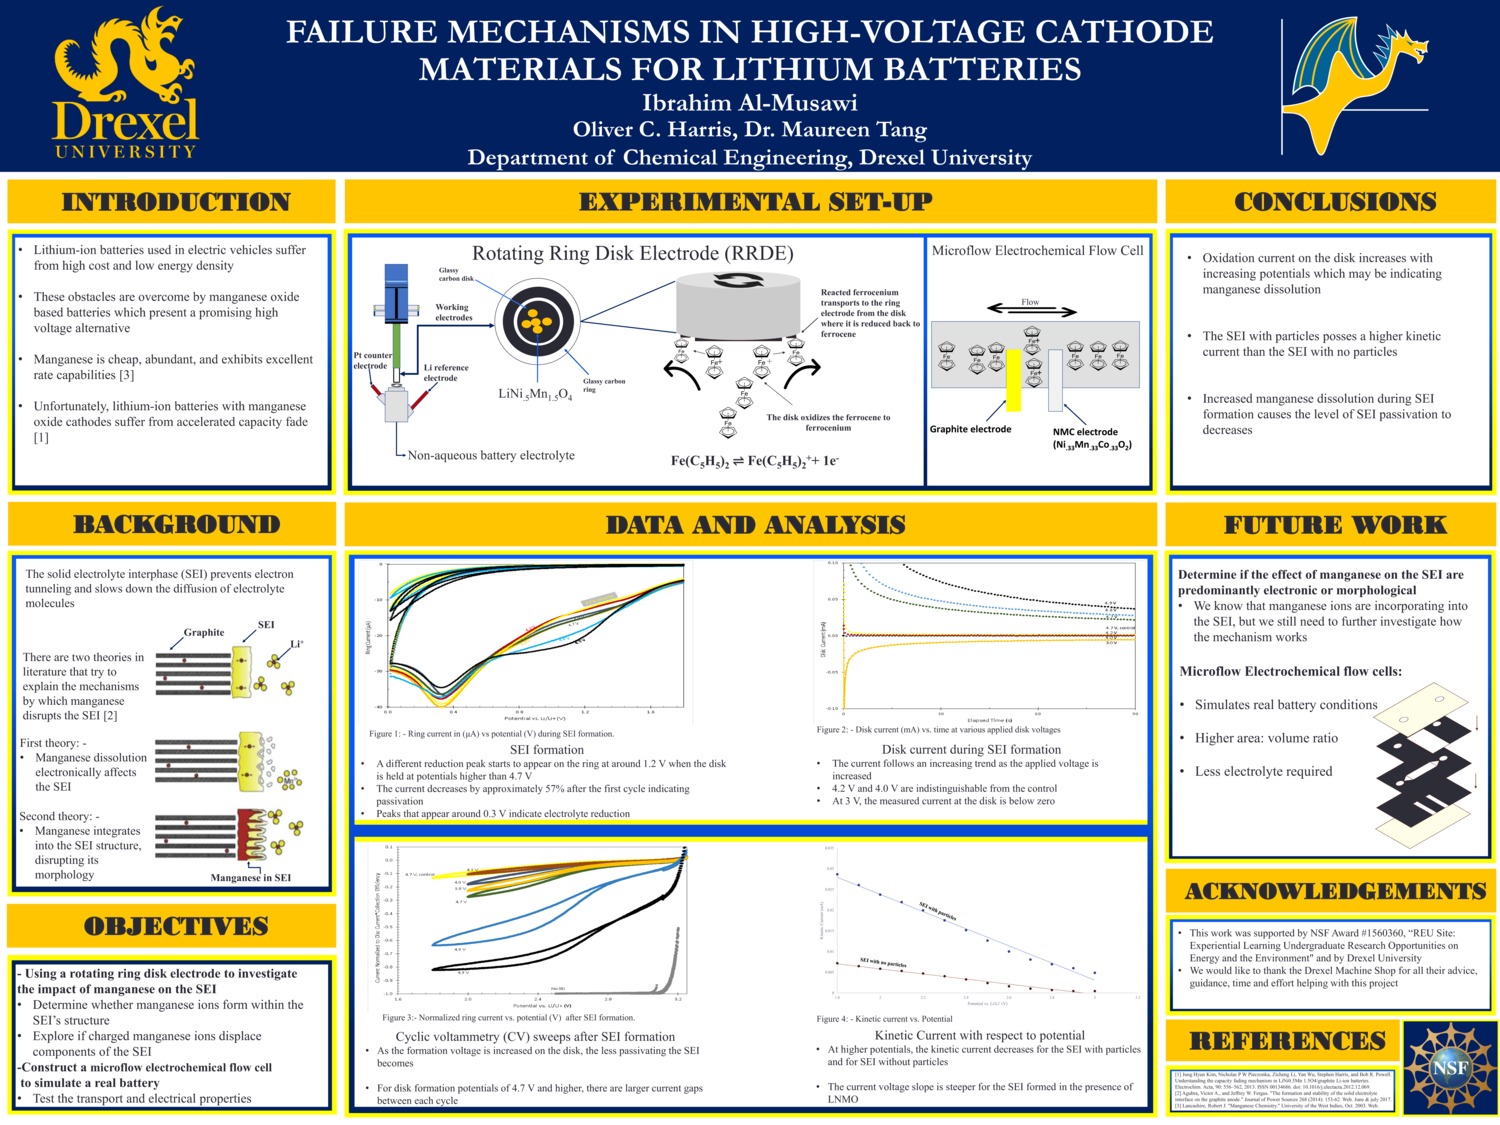 Failure Mechanisms In High-Voltage Cathode Materials For Lithium Batteries by ina1000